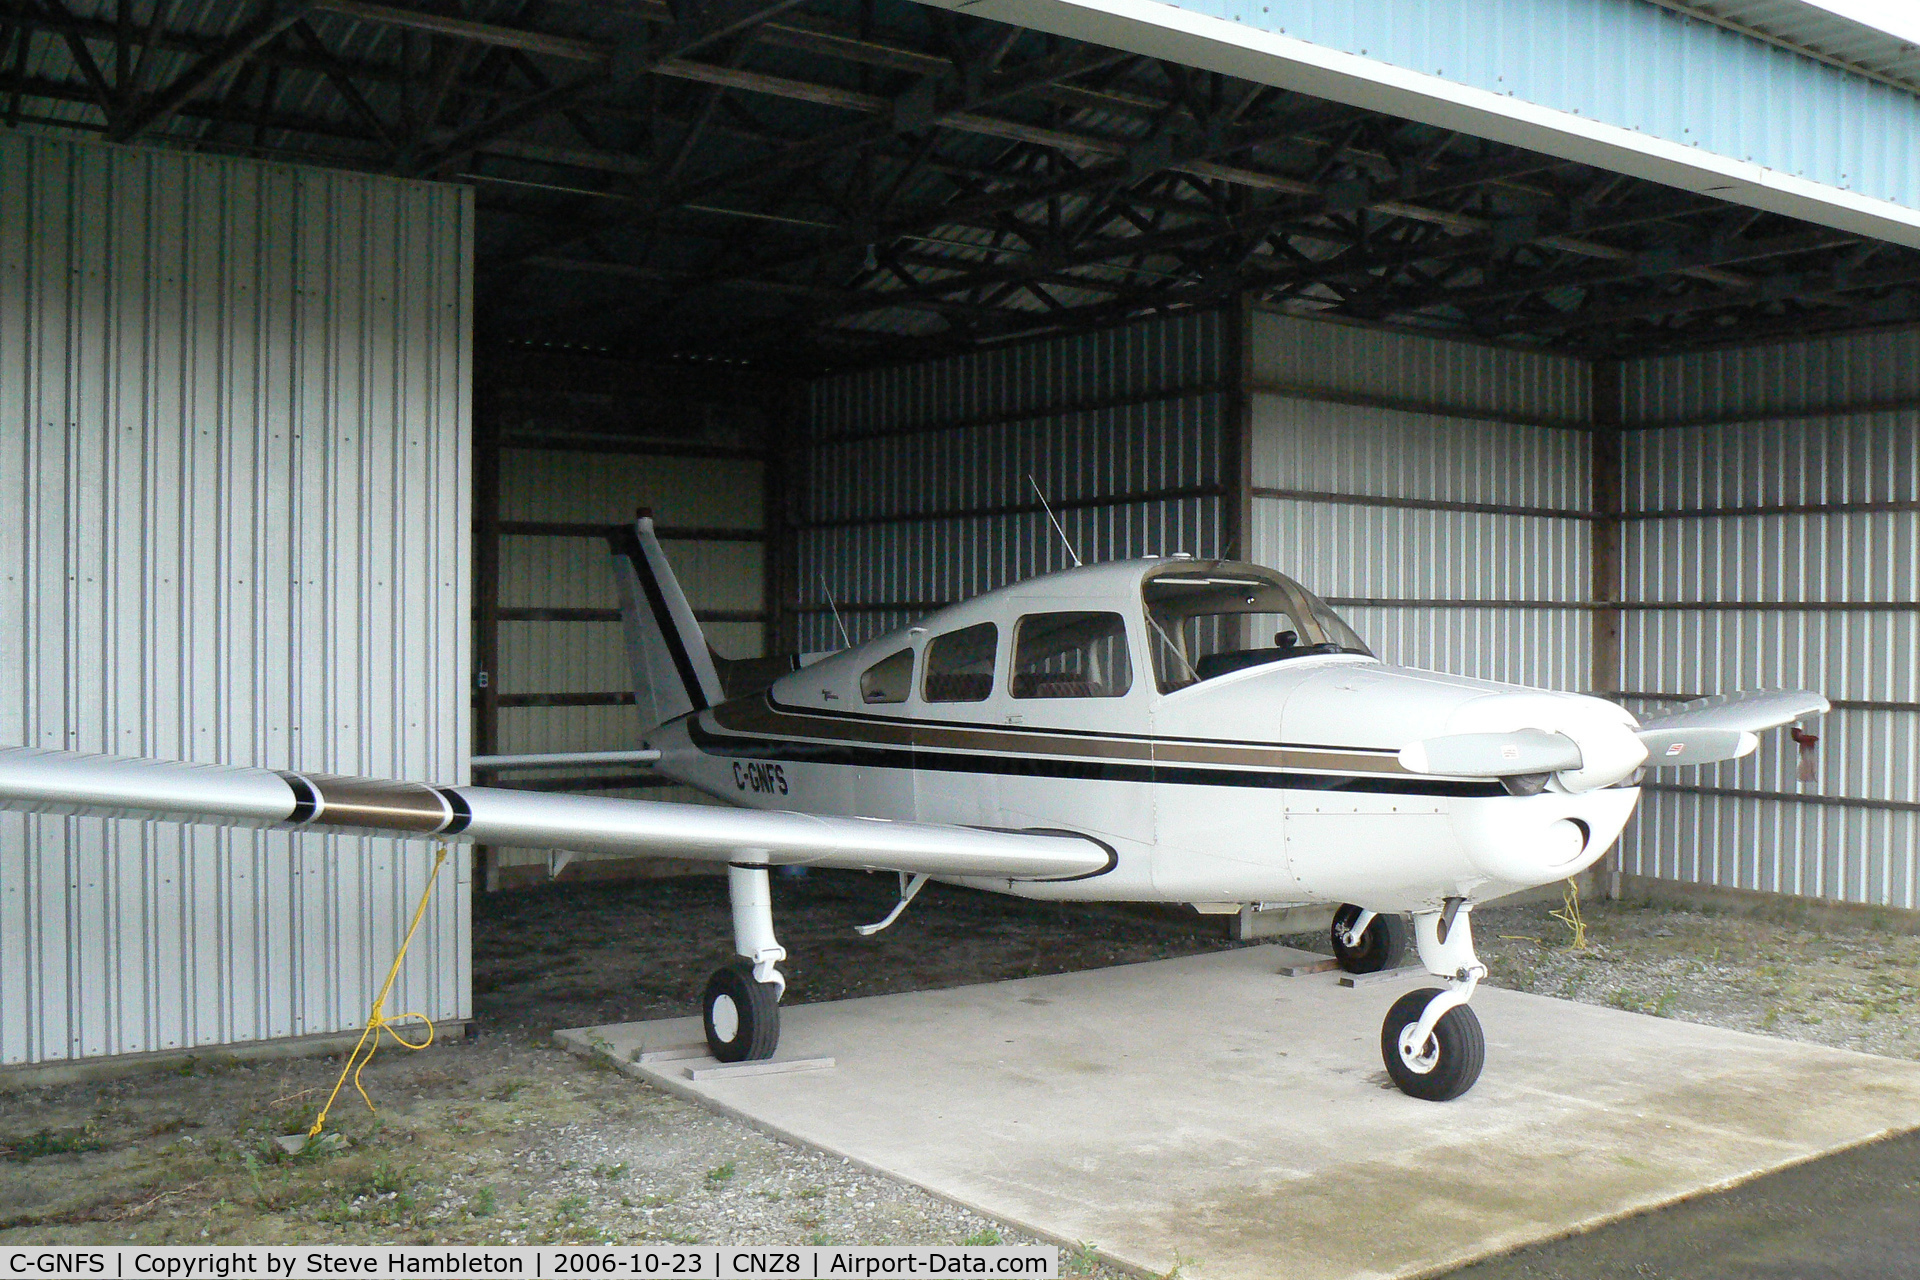 C-GNFS, 1966 Beech A23-24 Musketeer Super III C/N MA-138, At Grimsby Airpark, ON